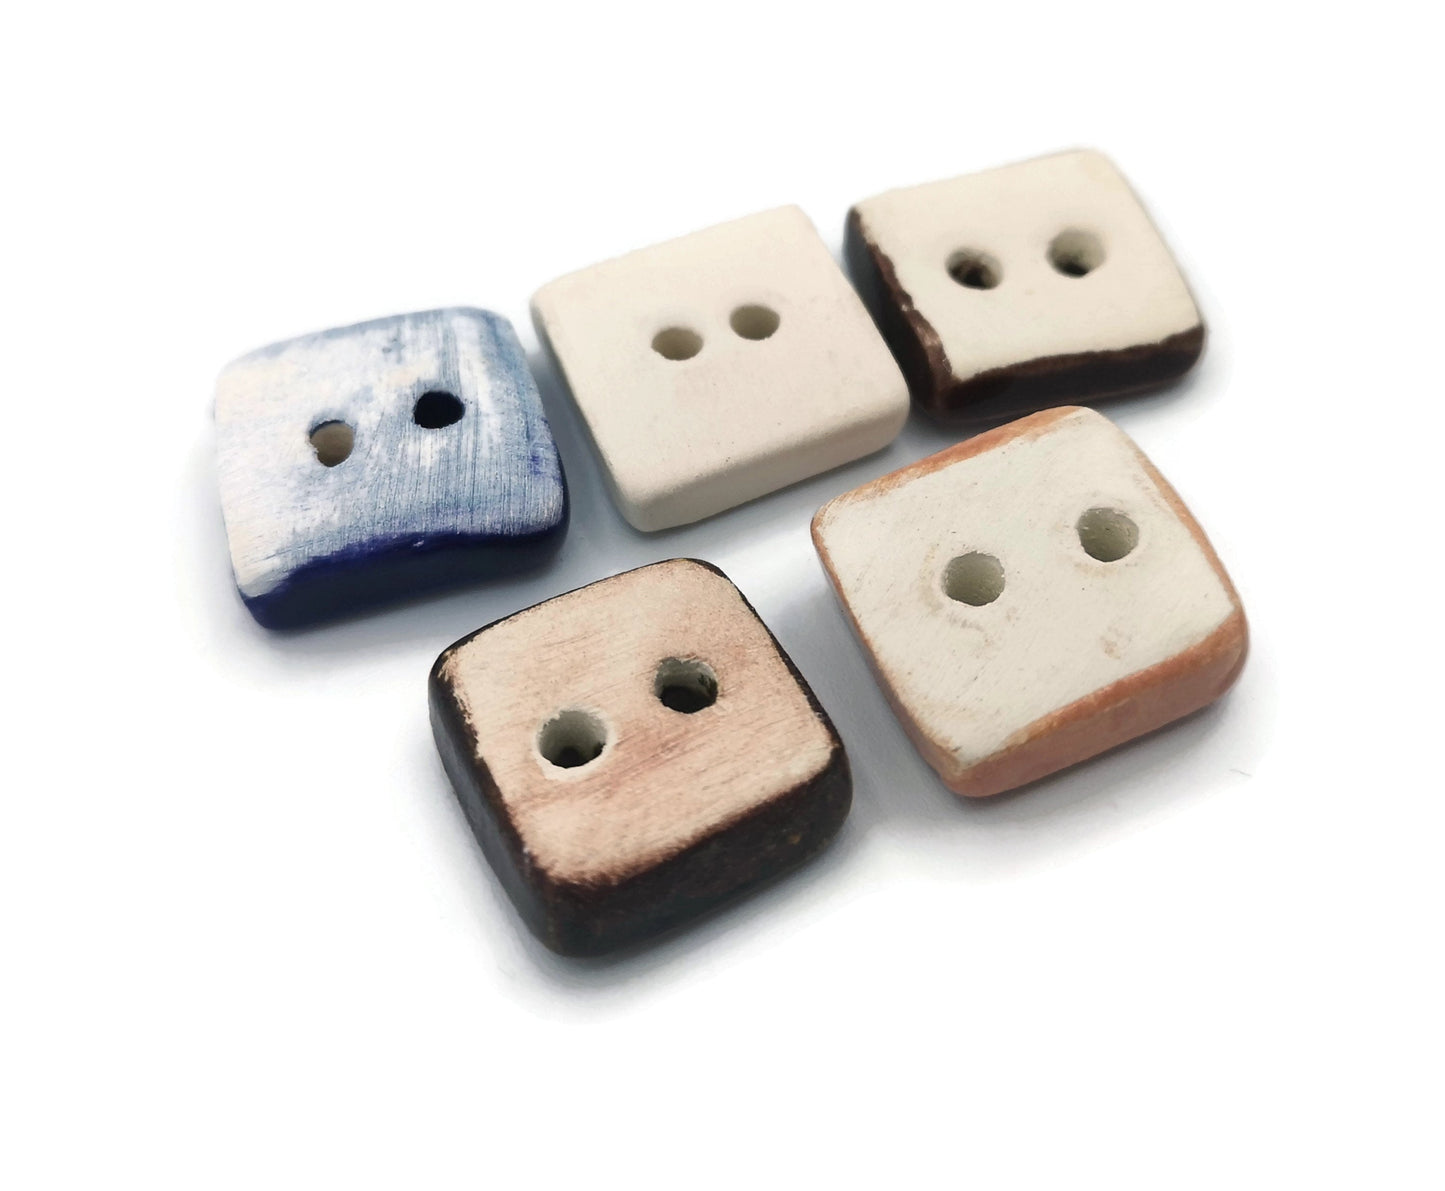 5Pc 20mm Handmade Ceramic Sewing Buttons For Clothing, Assorted Novelty Square Buttons For Crafts, Flat Back 2 Holes Coat Buttons - Ceramica Ana Rafael